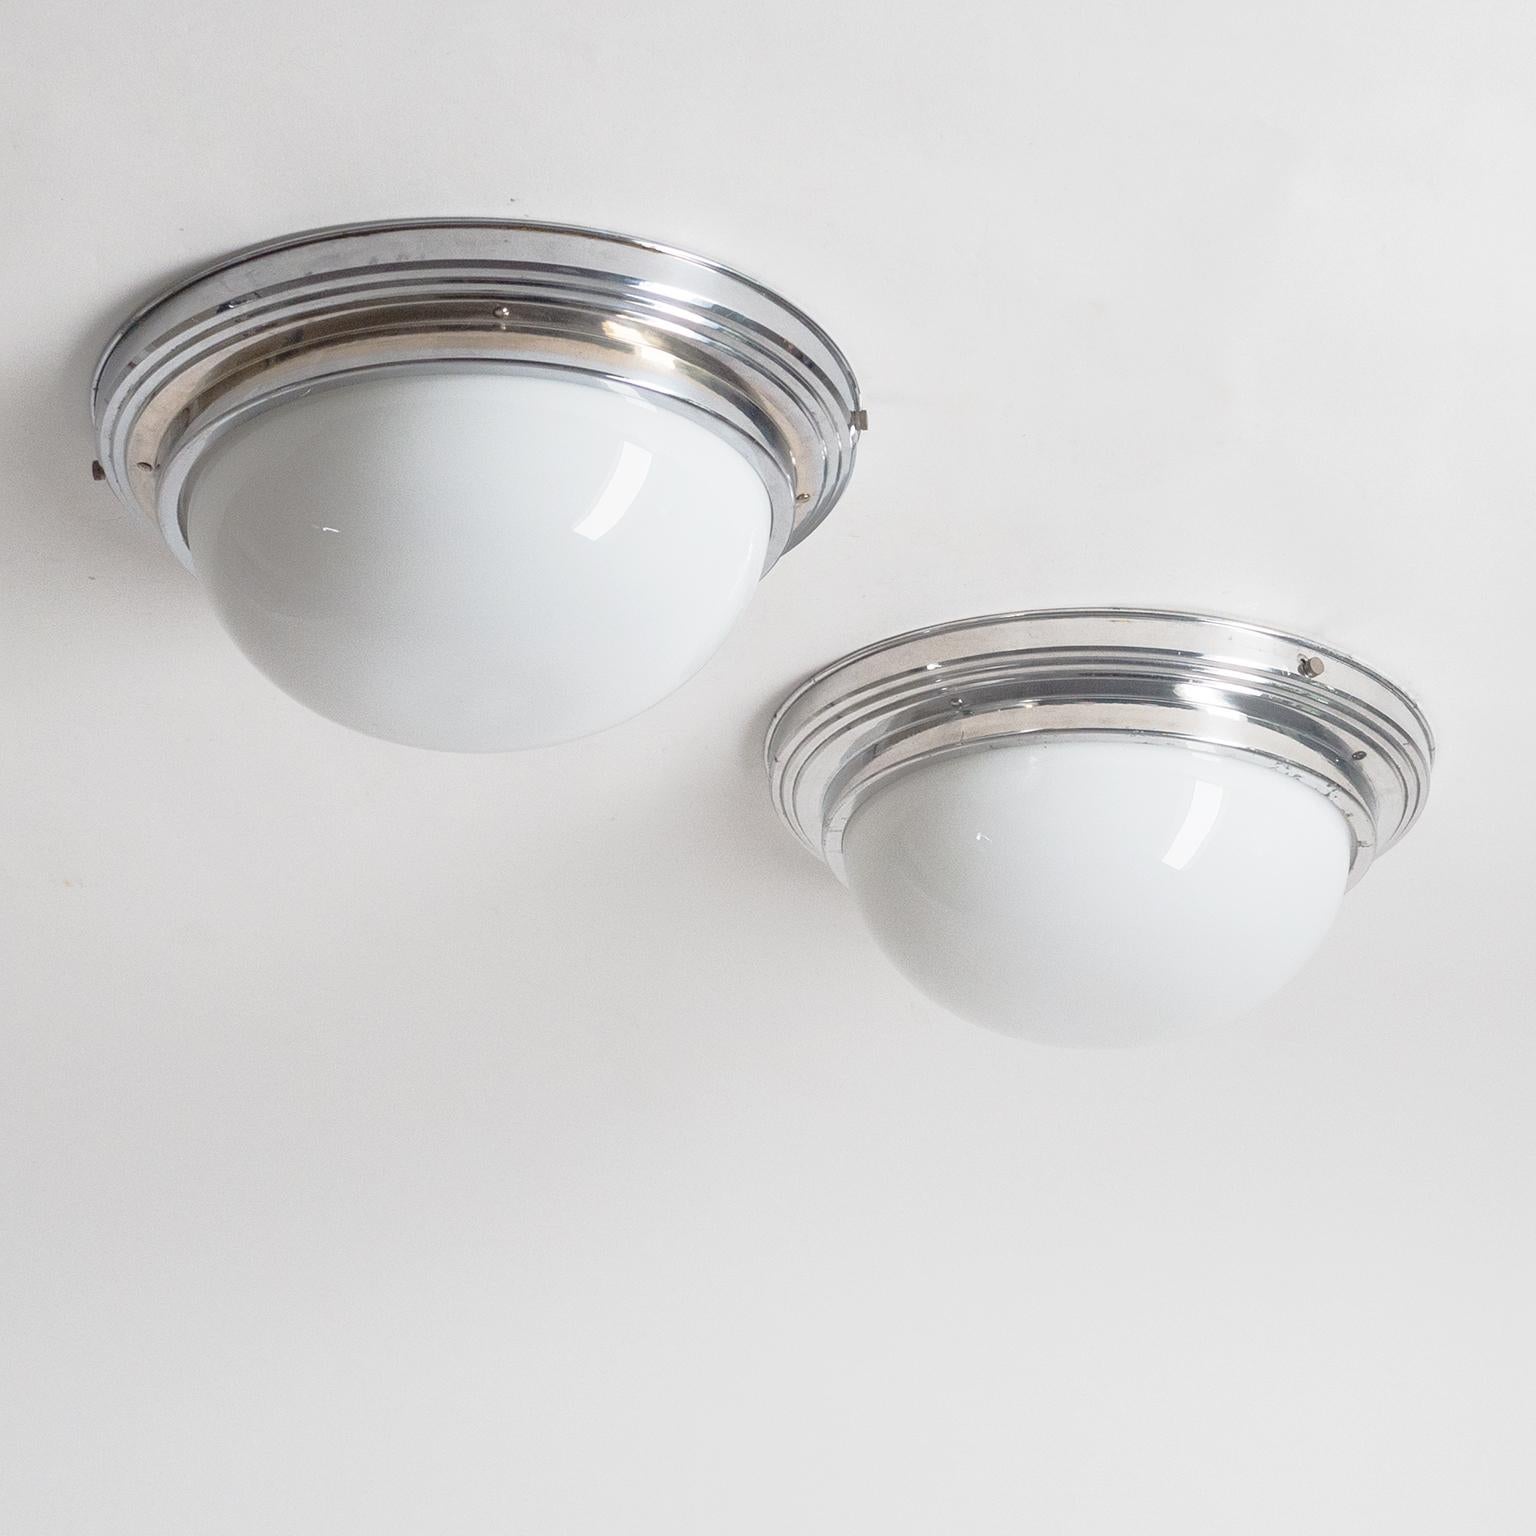 Pair of French Art Deco ceiling or wall lights from the 1930s-1940s. Matching pair, the only difference being that one backplate is made of polished aluminum while the other is chromed brass. Two brass and ceramic E14 sockets each with new wiring.